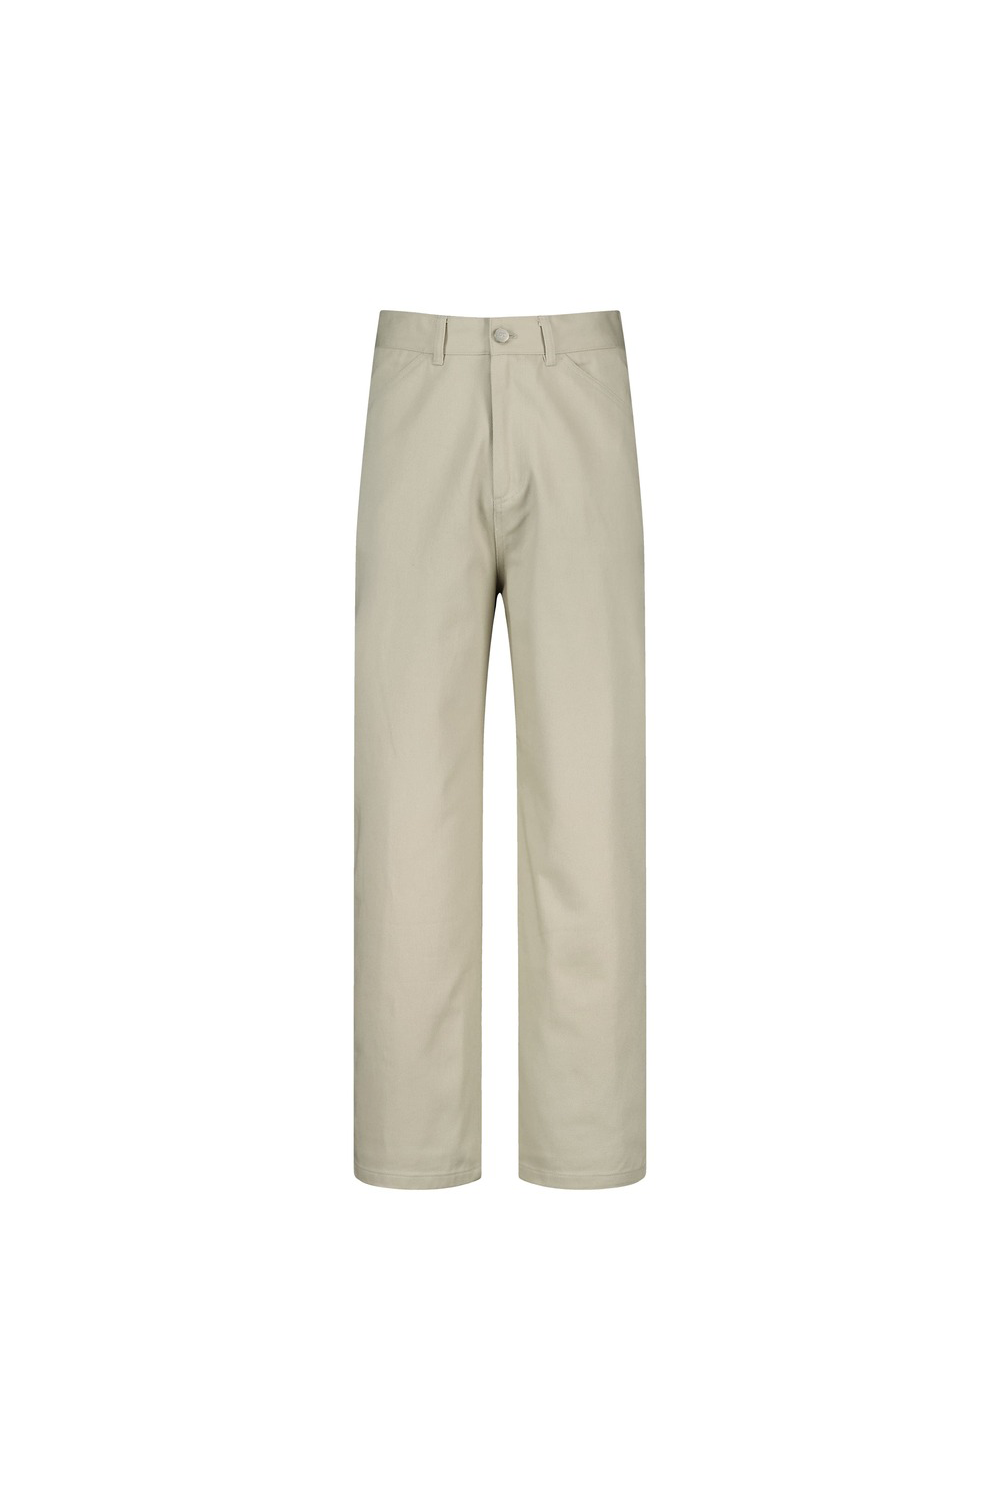 Cotton Trousers - Ivory/Navy